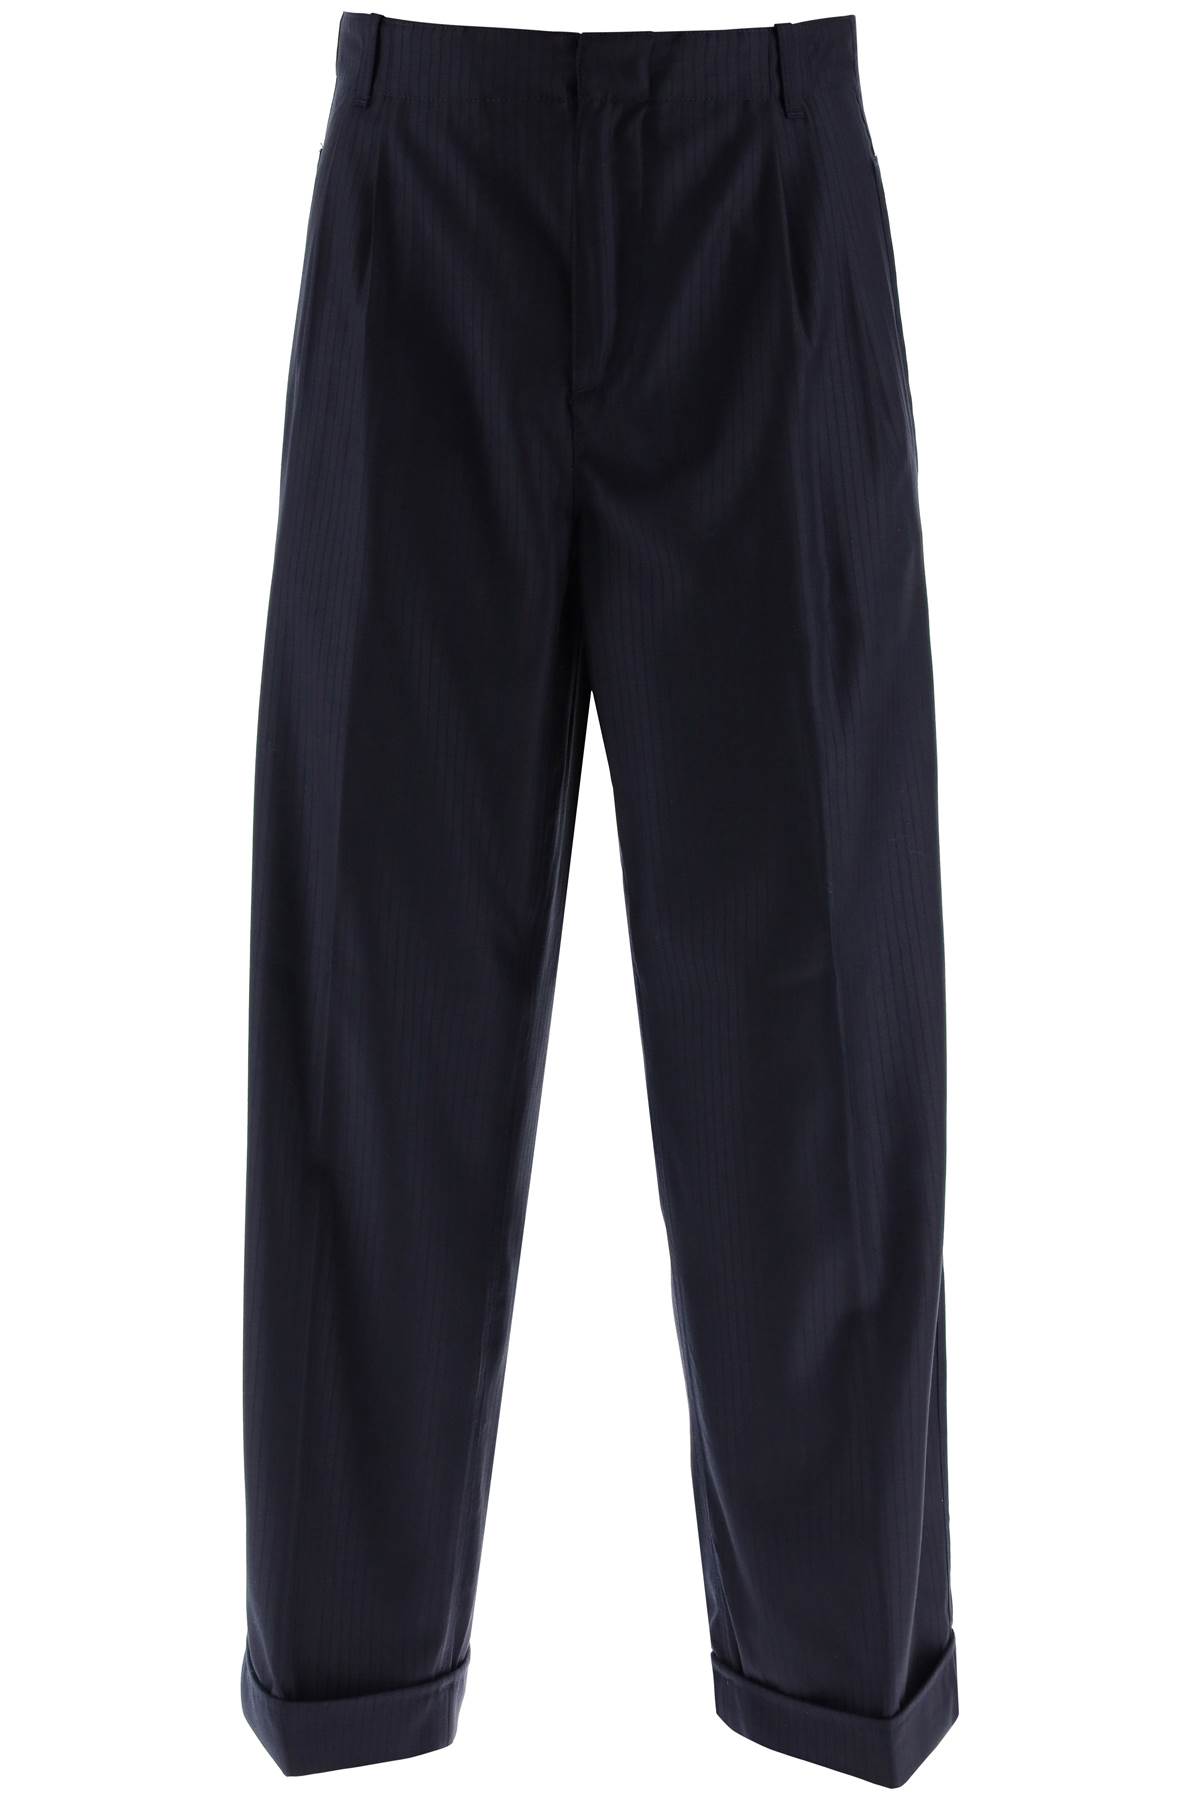 Etro Striped Wool Cropped Trousers